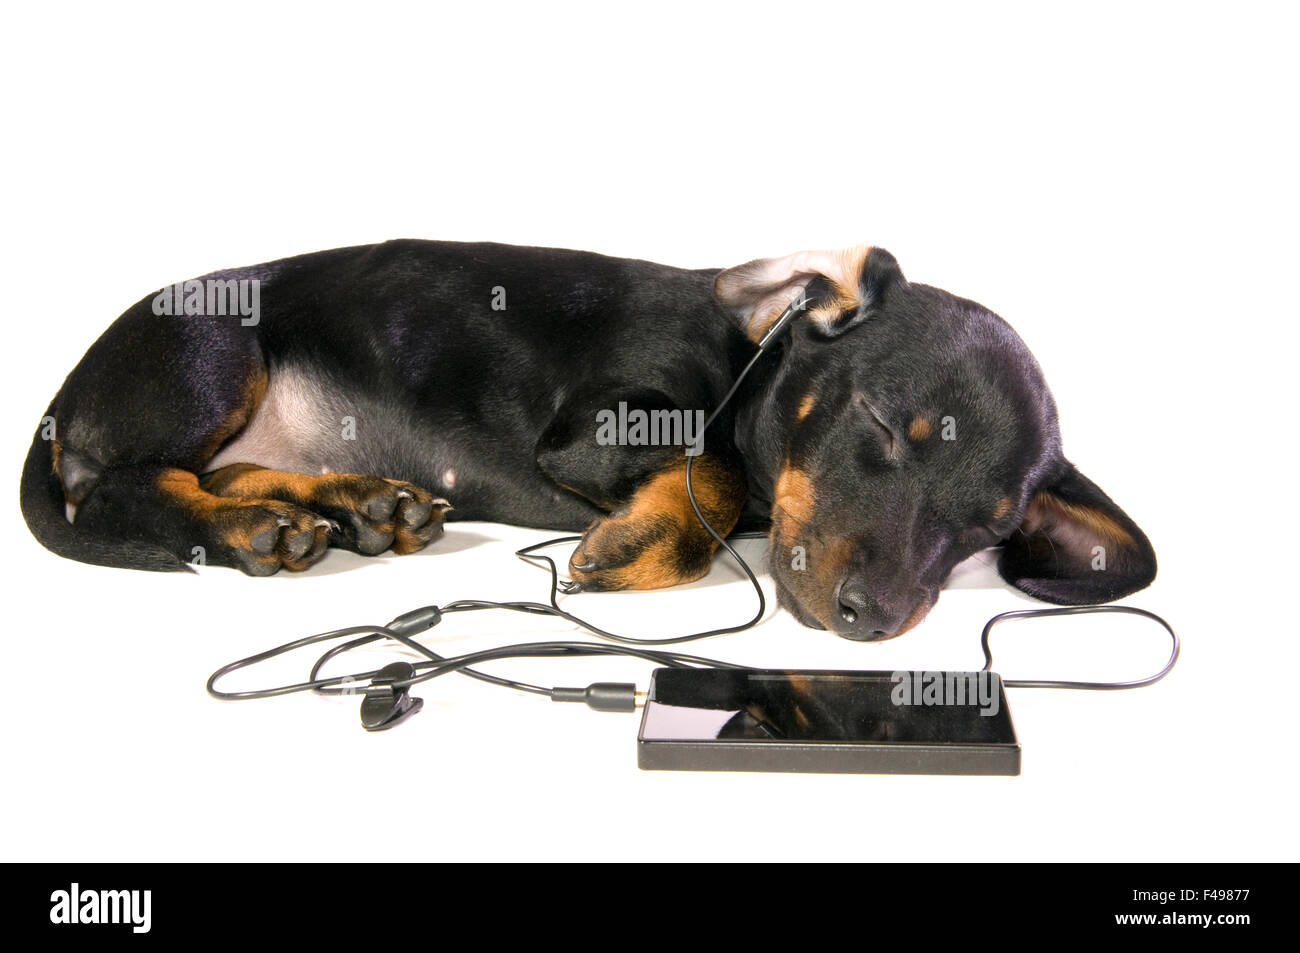 Dog with a mp3 player Stock Photo